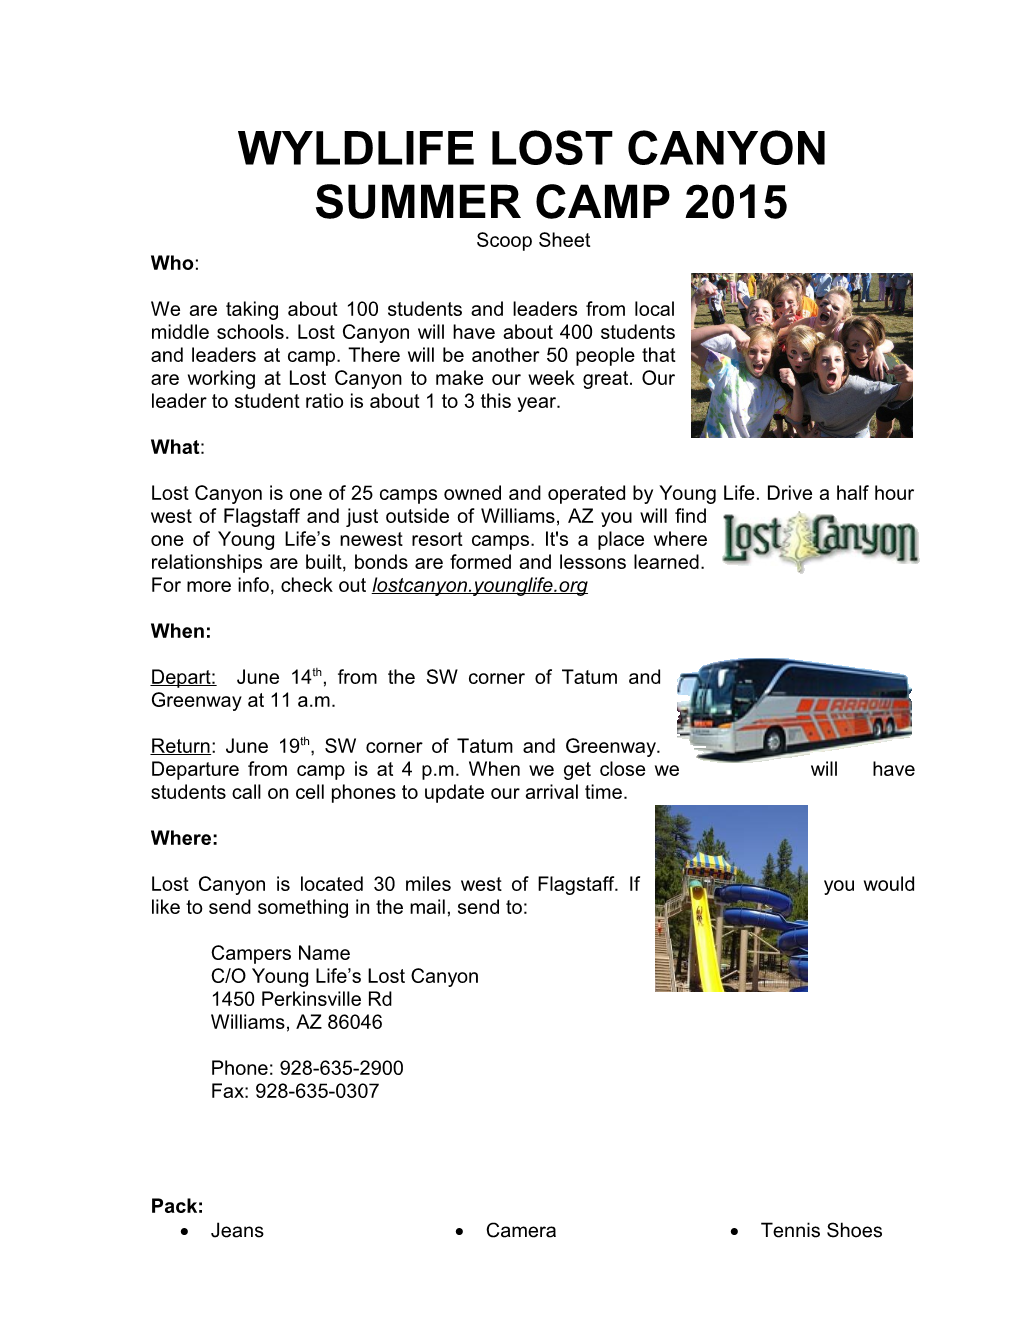 Wyldlife Lost Canyon Summer Camp 2015